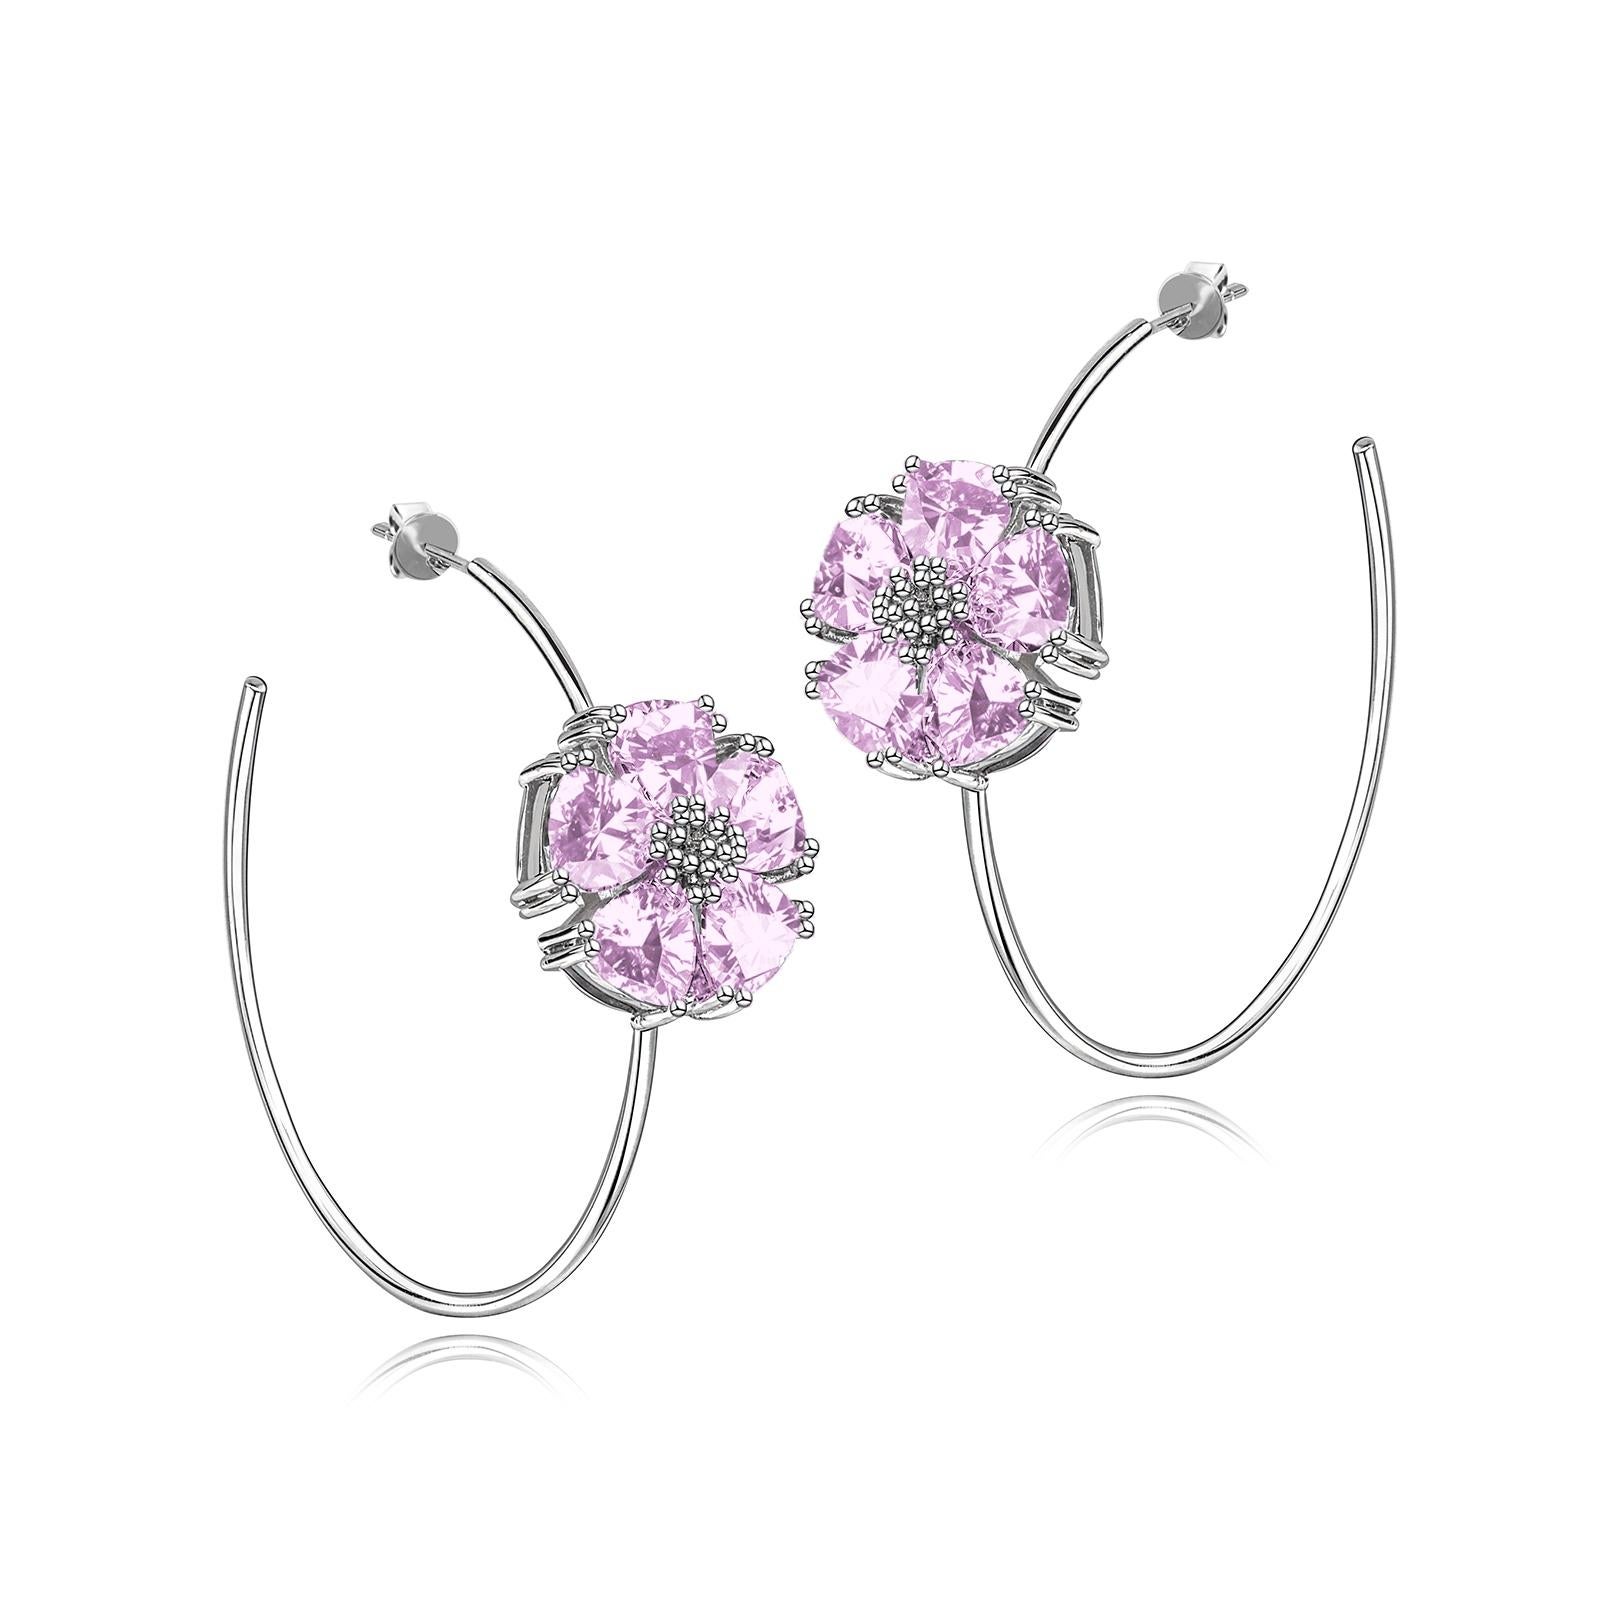 Designed in NYC

.925 Sterling Silver 2 x 20 mm White Topaz Blossom Stone Open Hoops. No matter the season, allow natural beauty to surround you wherever you go. Blossom stone open hoops: 

Sterling silver 
High-polish finish 
Light-weight 
2 x 20